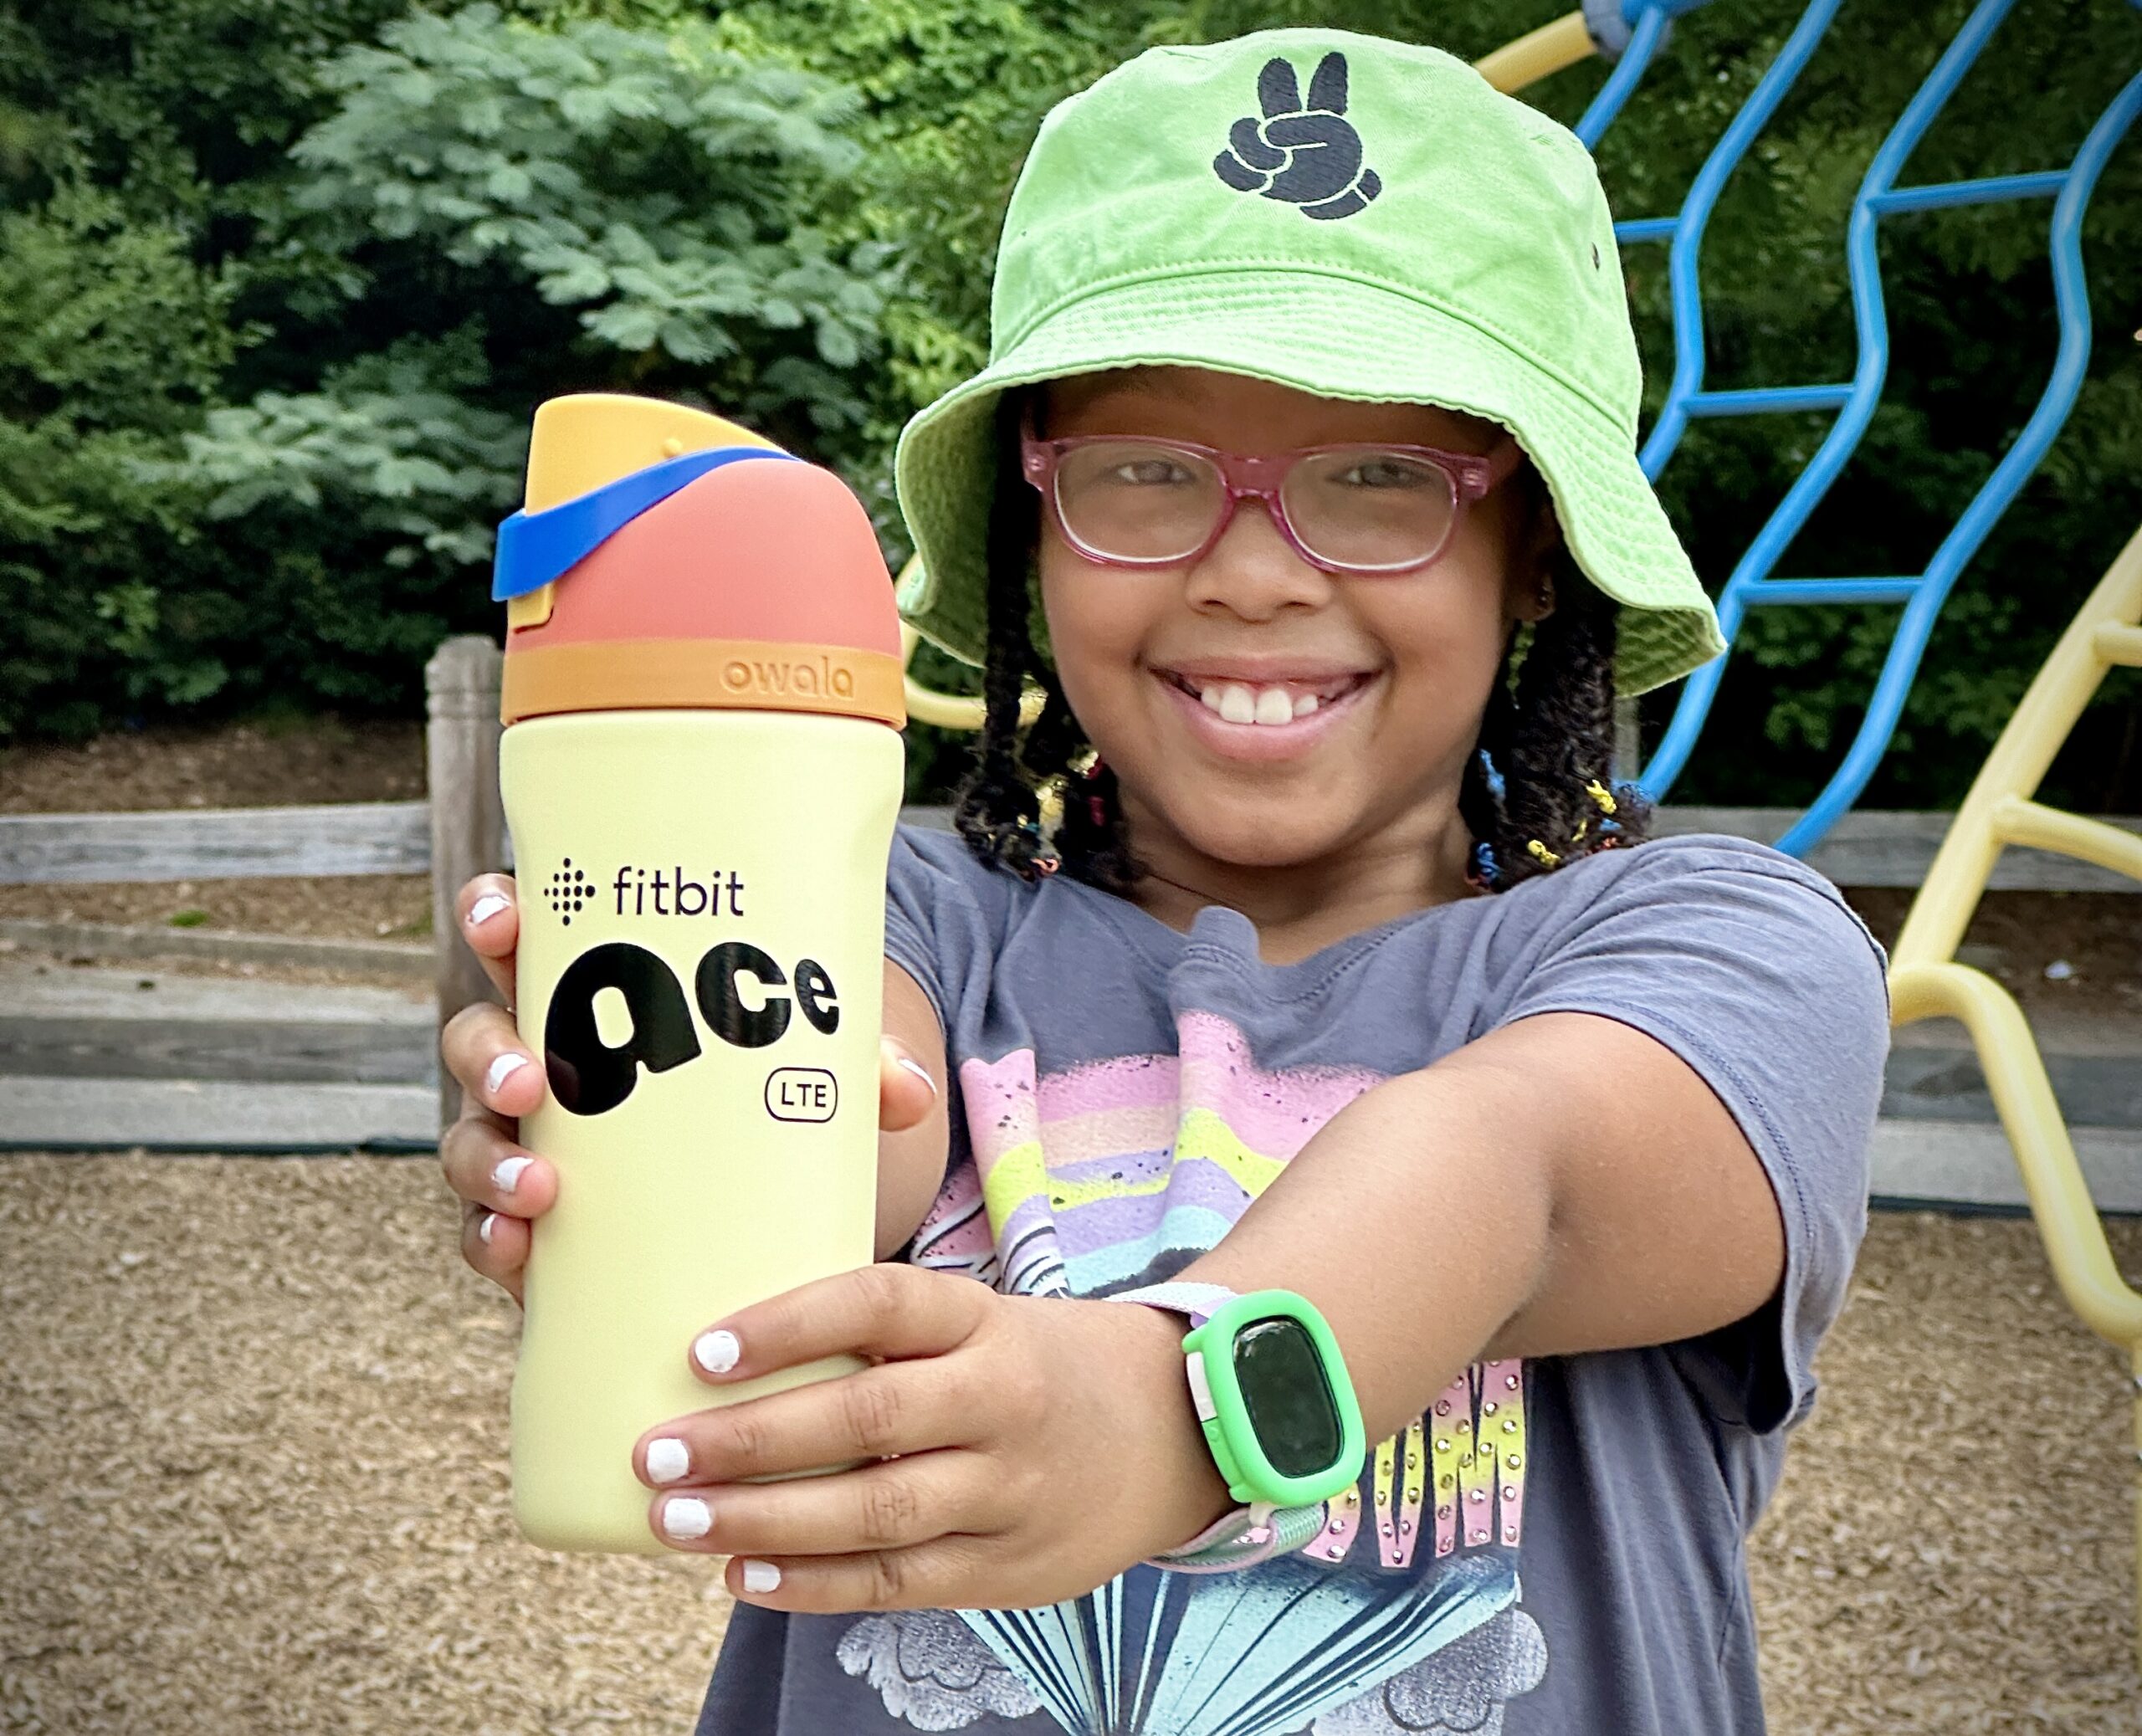 Marley with her google fitbit ace lte for kids and gear.